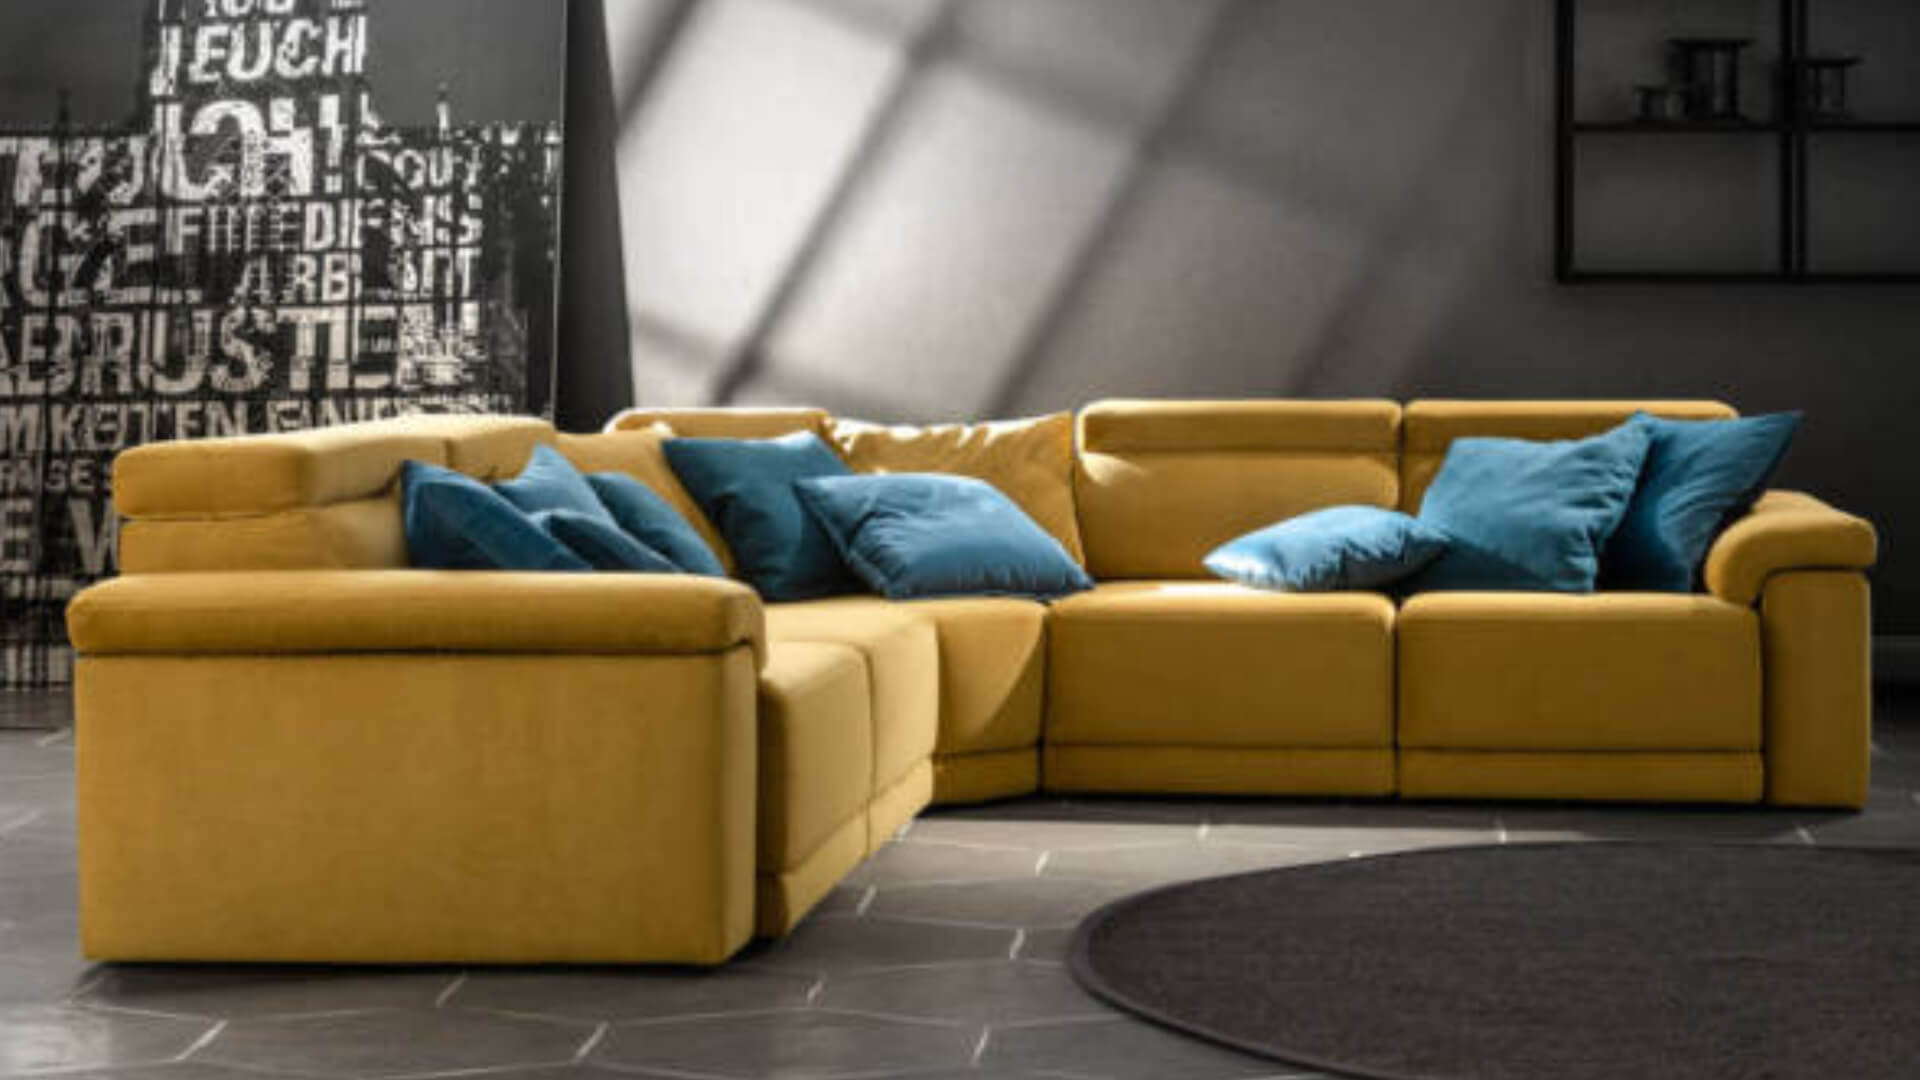 Blog IDW - How to choose the right colours for your furniture